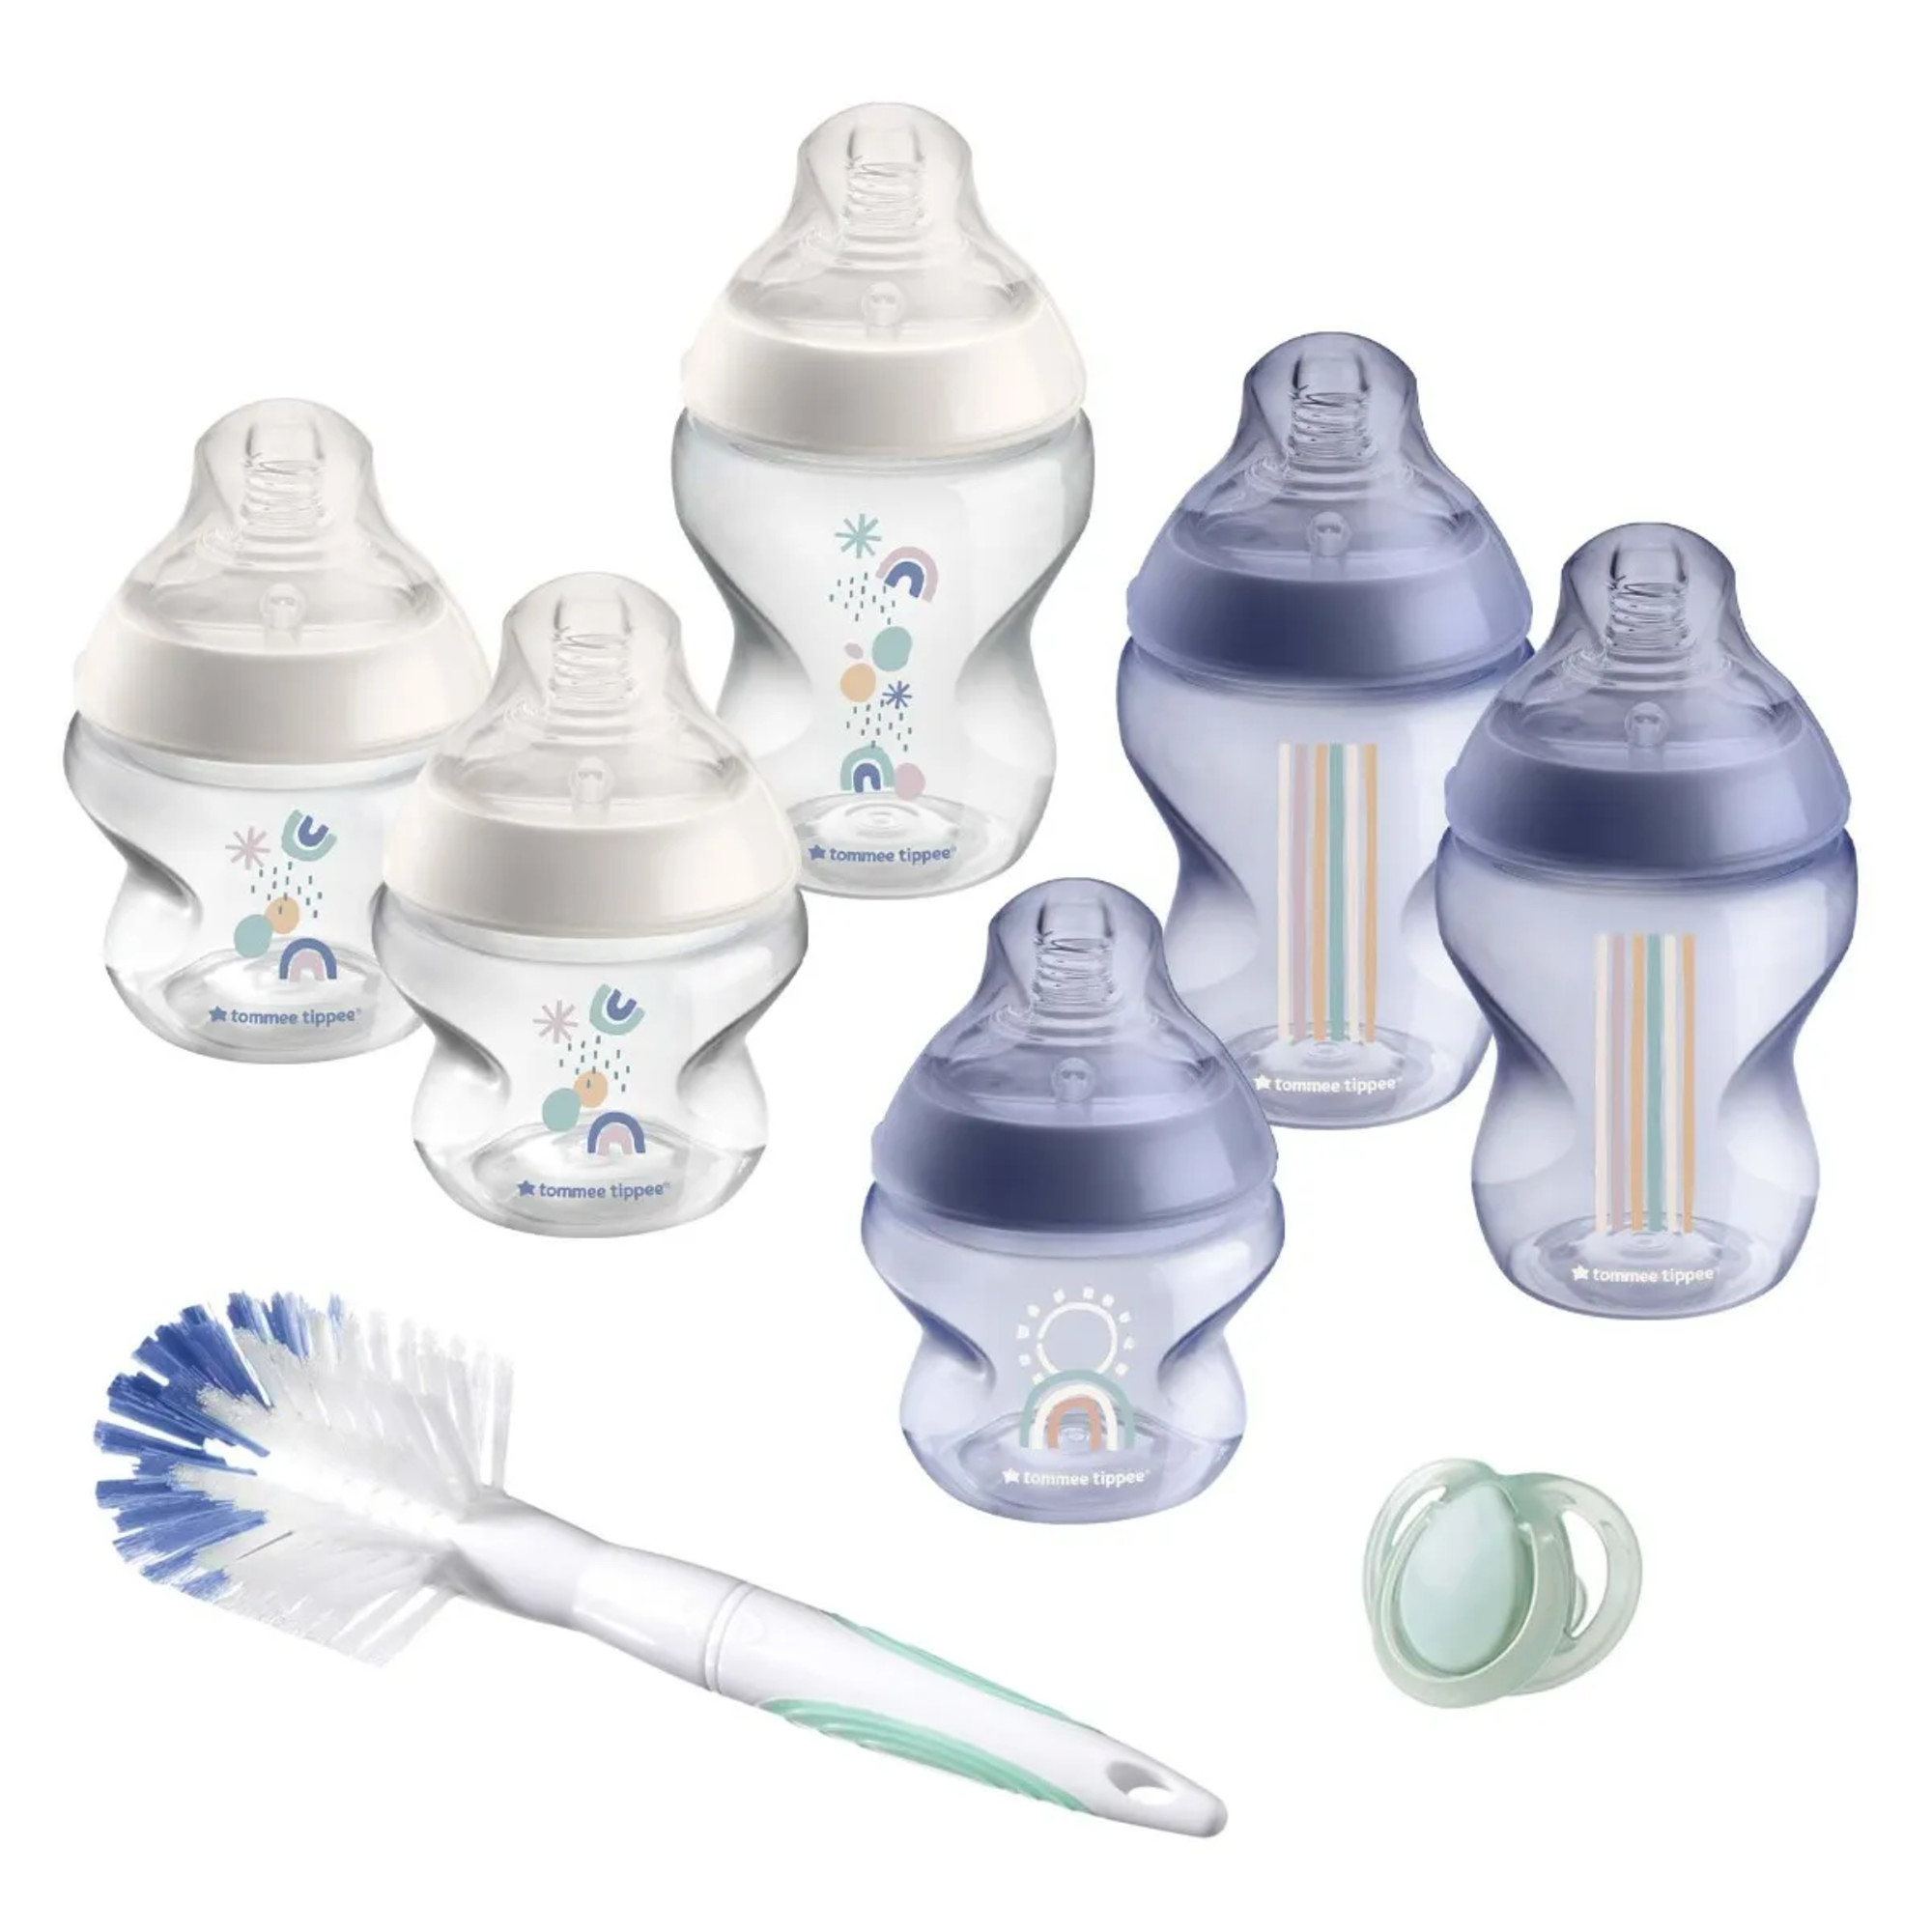 Tommee Tippee Closer to Nature 9pc Unisex Baby Bottle Starter Set - Blue